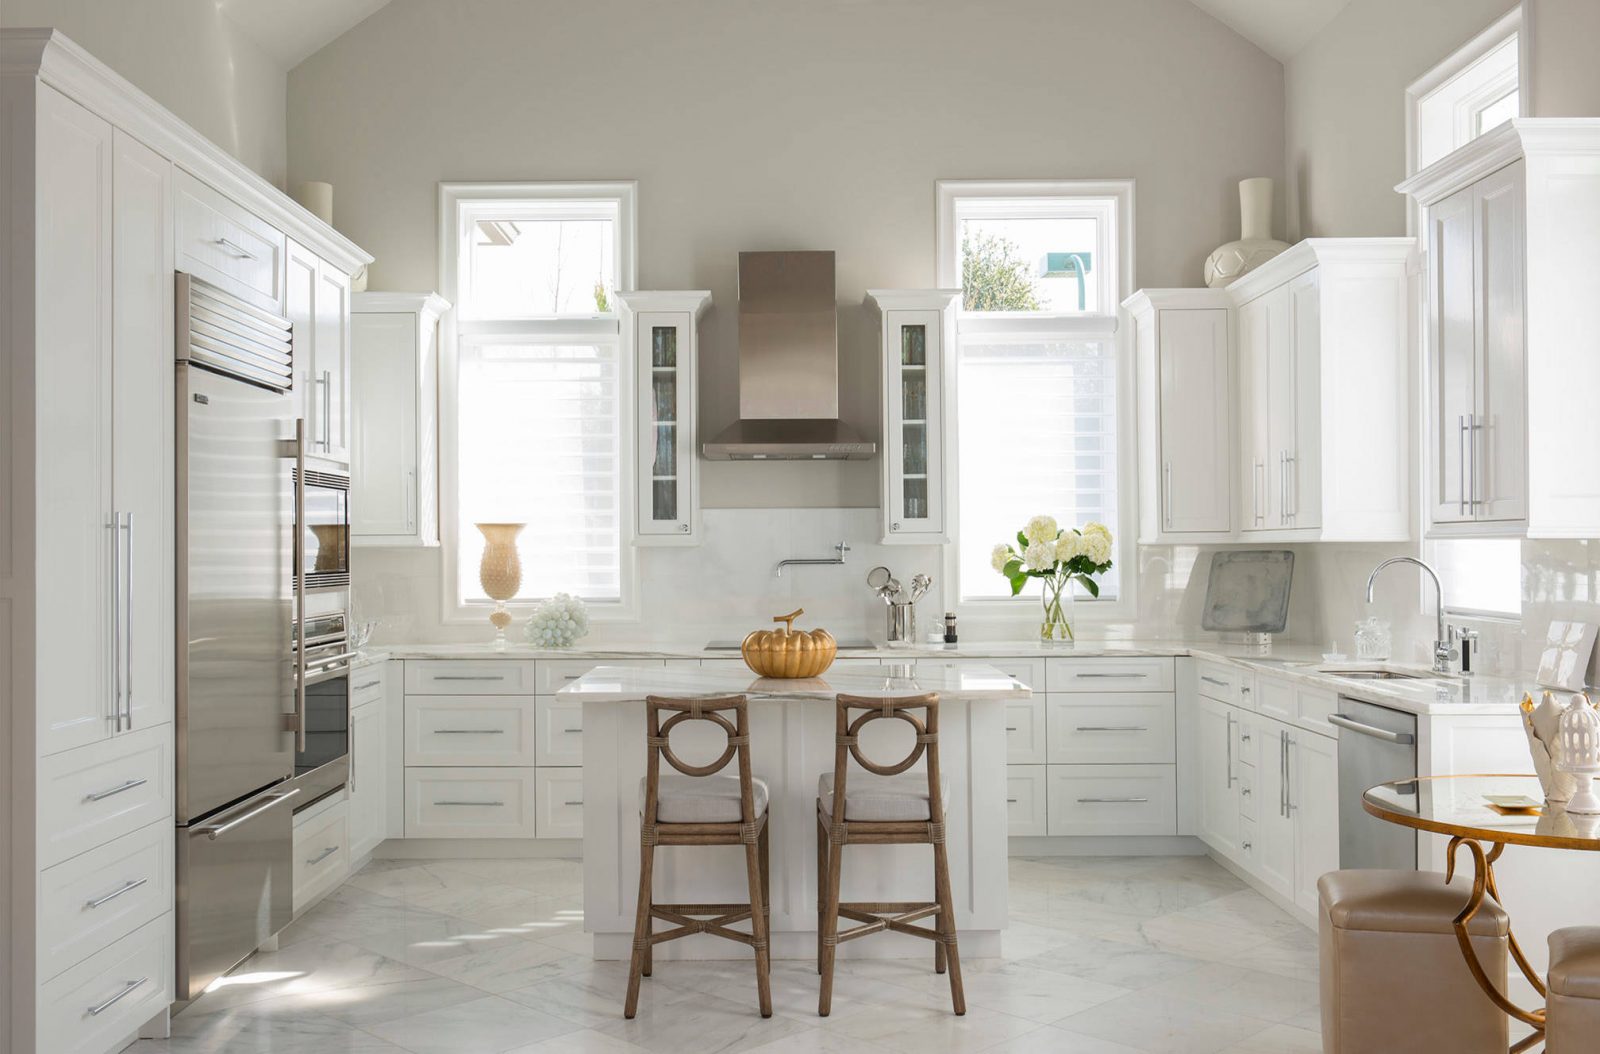 What Color Should I Paint My Kitchen With White Cabinets 7 Best Choices To Consider Jimenezphoto